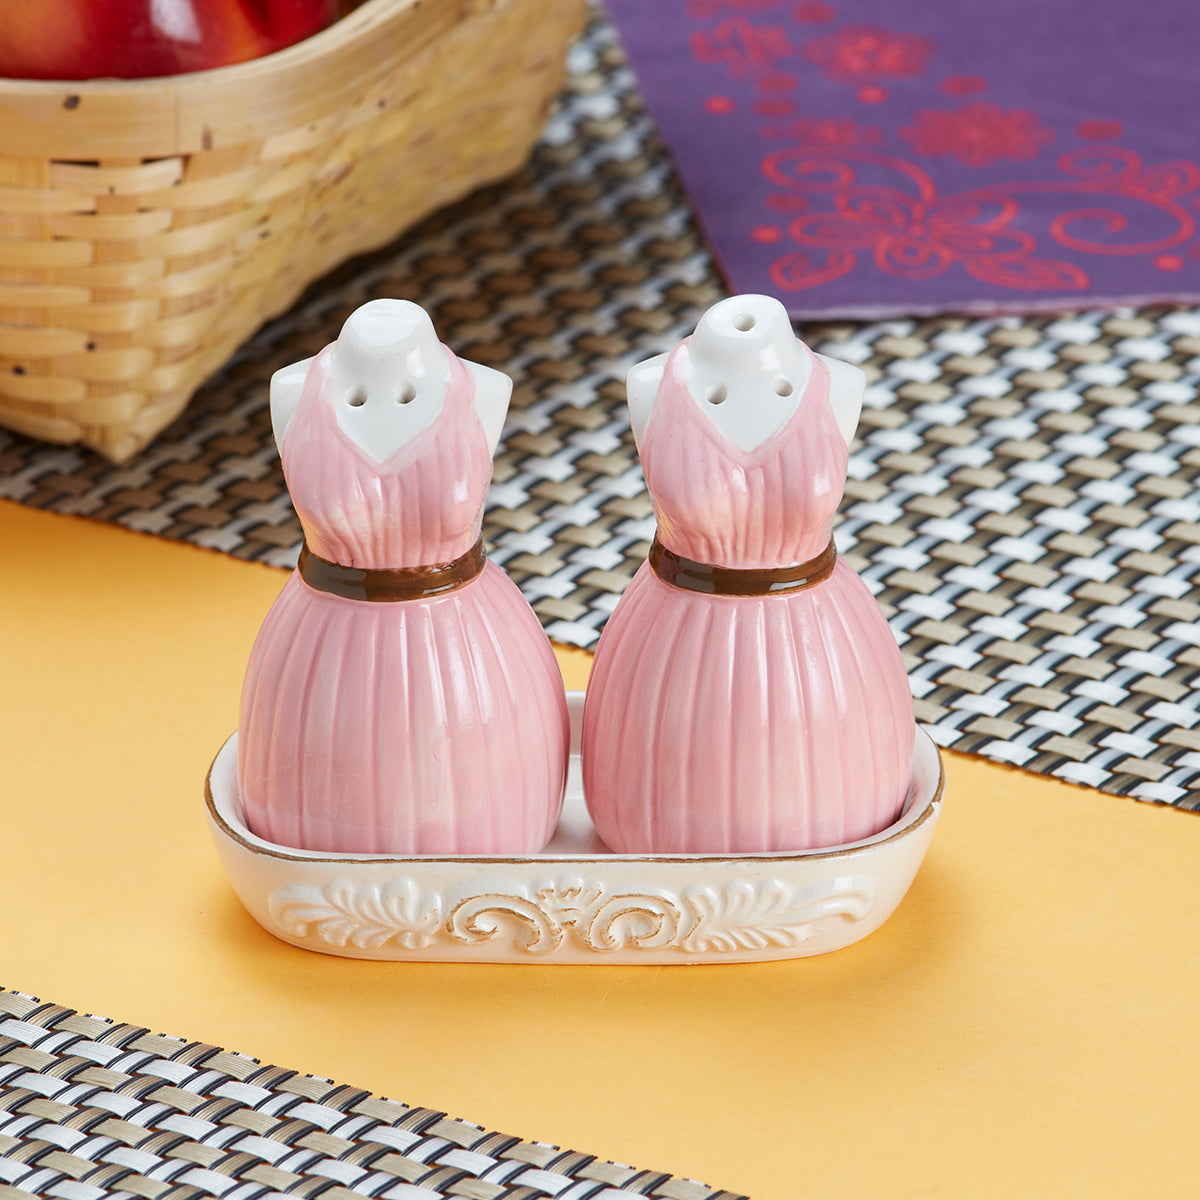 Kookee Ceramic Salt and Pepper Shakers Set with tray for Dining Table used as Namak Dhani, Shaker, Sprinkler, Spices Dispenser for Home, Kitchen and Restaurant (9971)